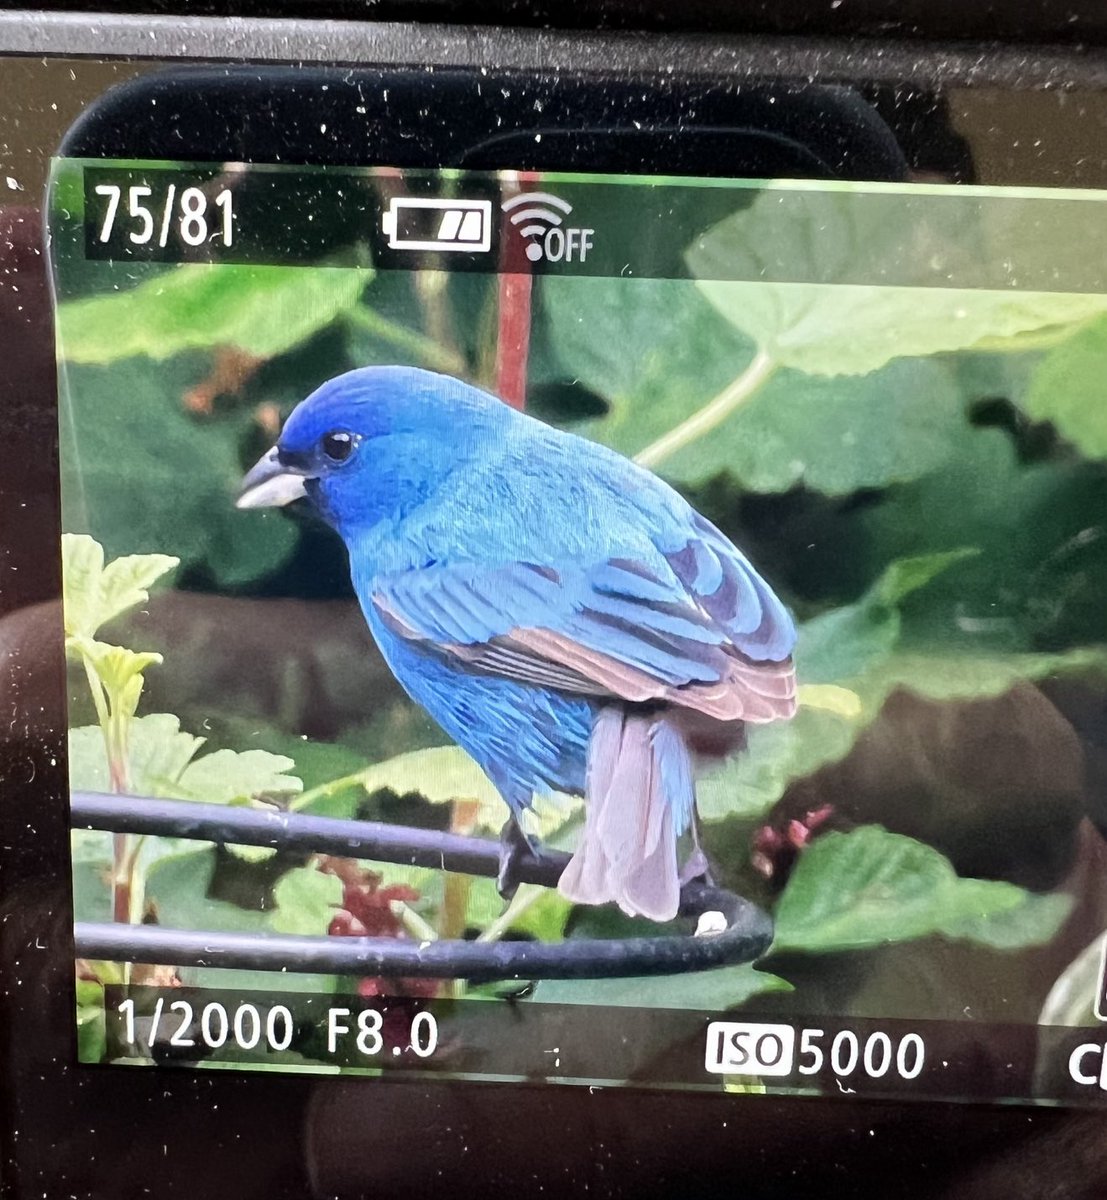 Male Indigo Bunting in a Whitburn garden coming to feeders. Another shocking new bird for the county!